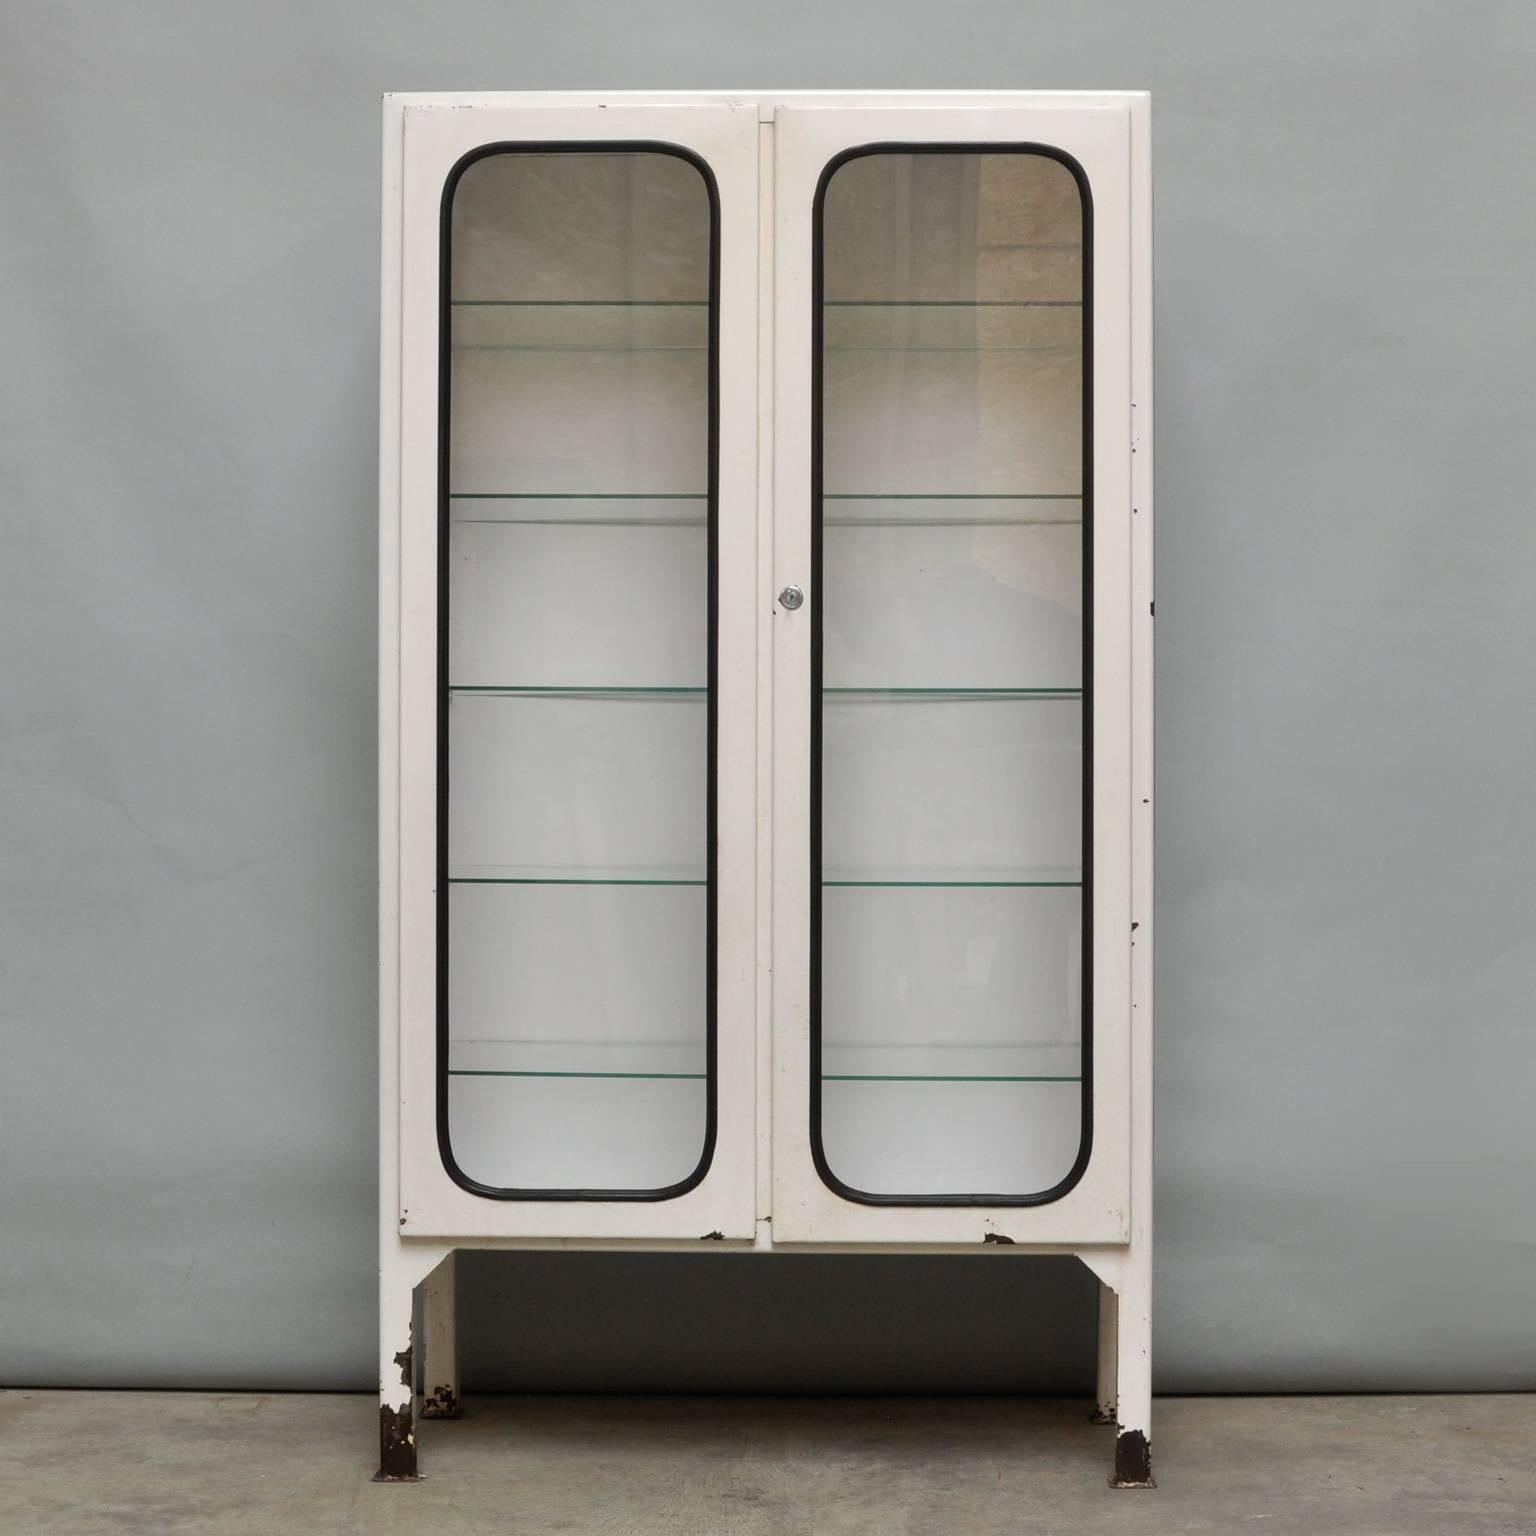 This former medical cabinet was designed in the 1970s and produced, circa 1975 in Hungary. It is made of iron and glass. The glass is secured by a black rubber strip. The cabinet comes with five new adjustable glass shelves and a functioning lock.